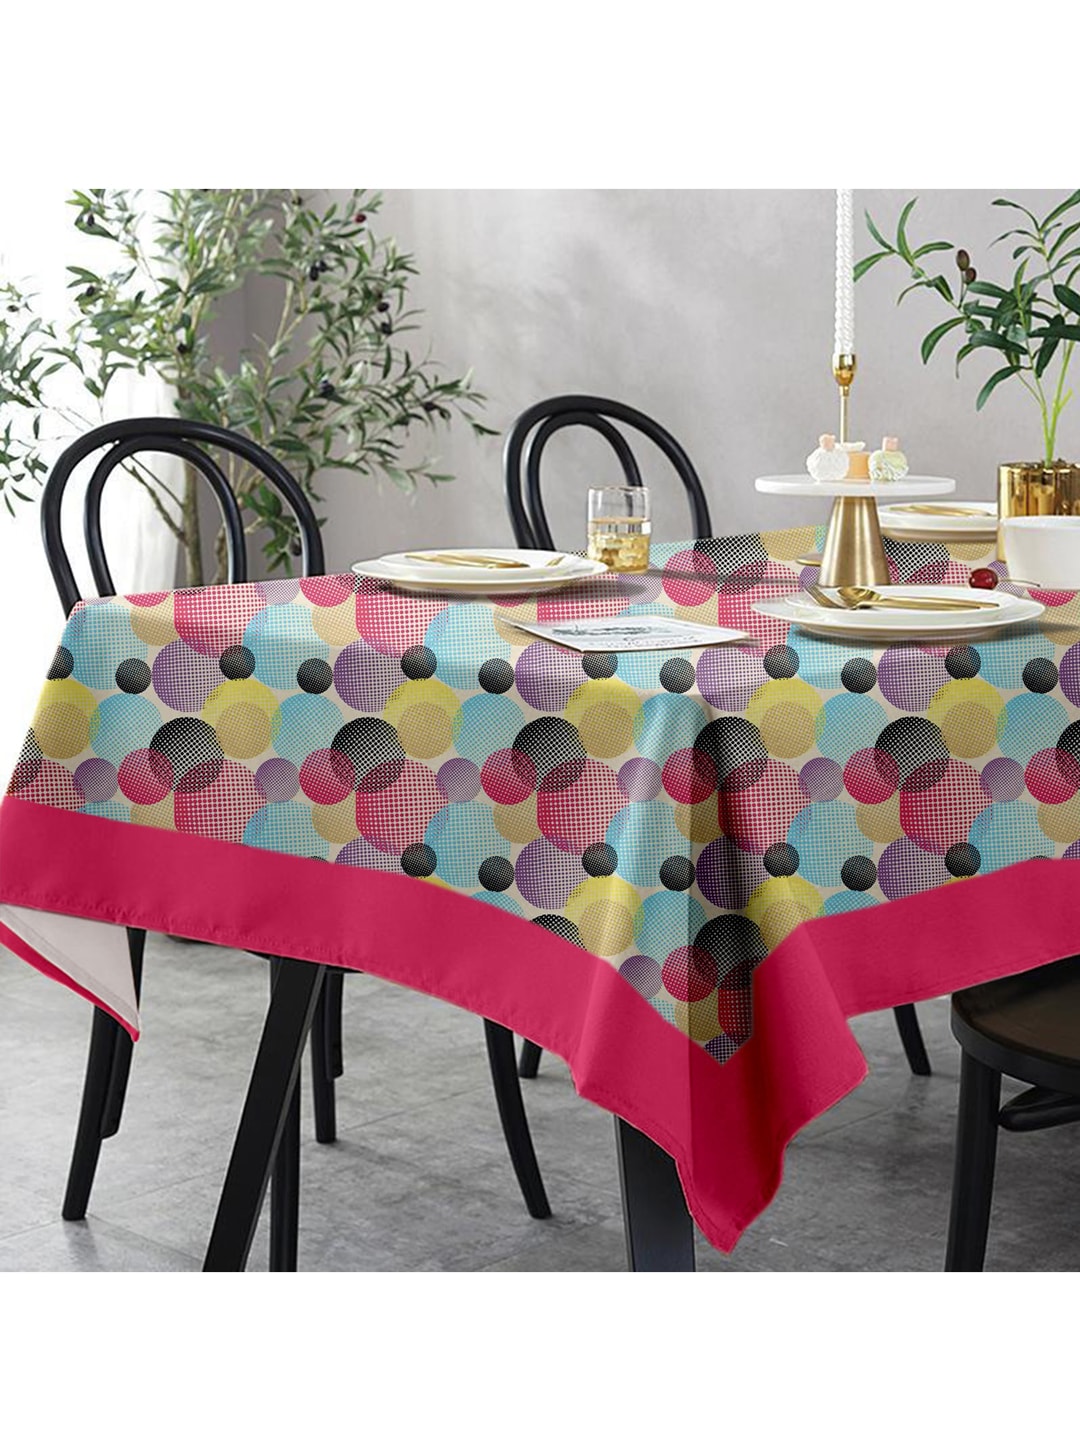 Lushomes 8 Seater Circles Printed Table Cloth Price in India